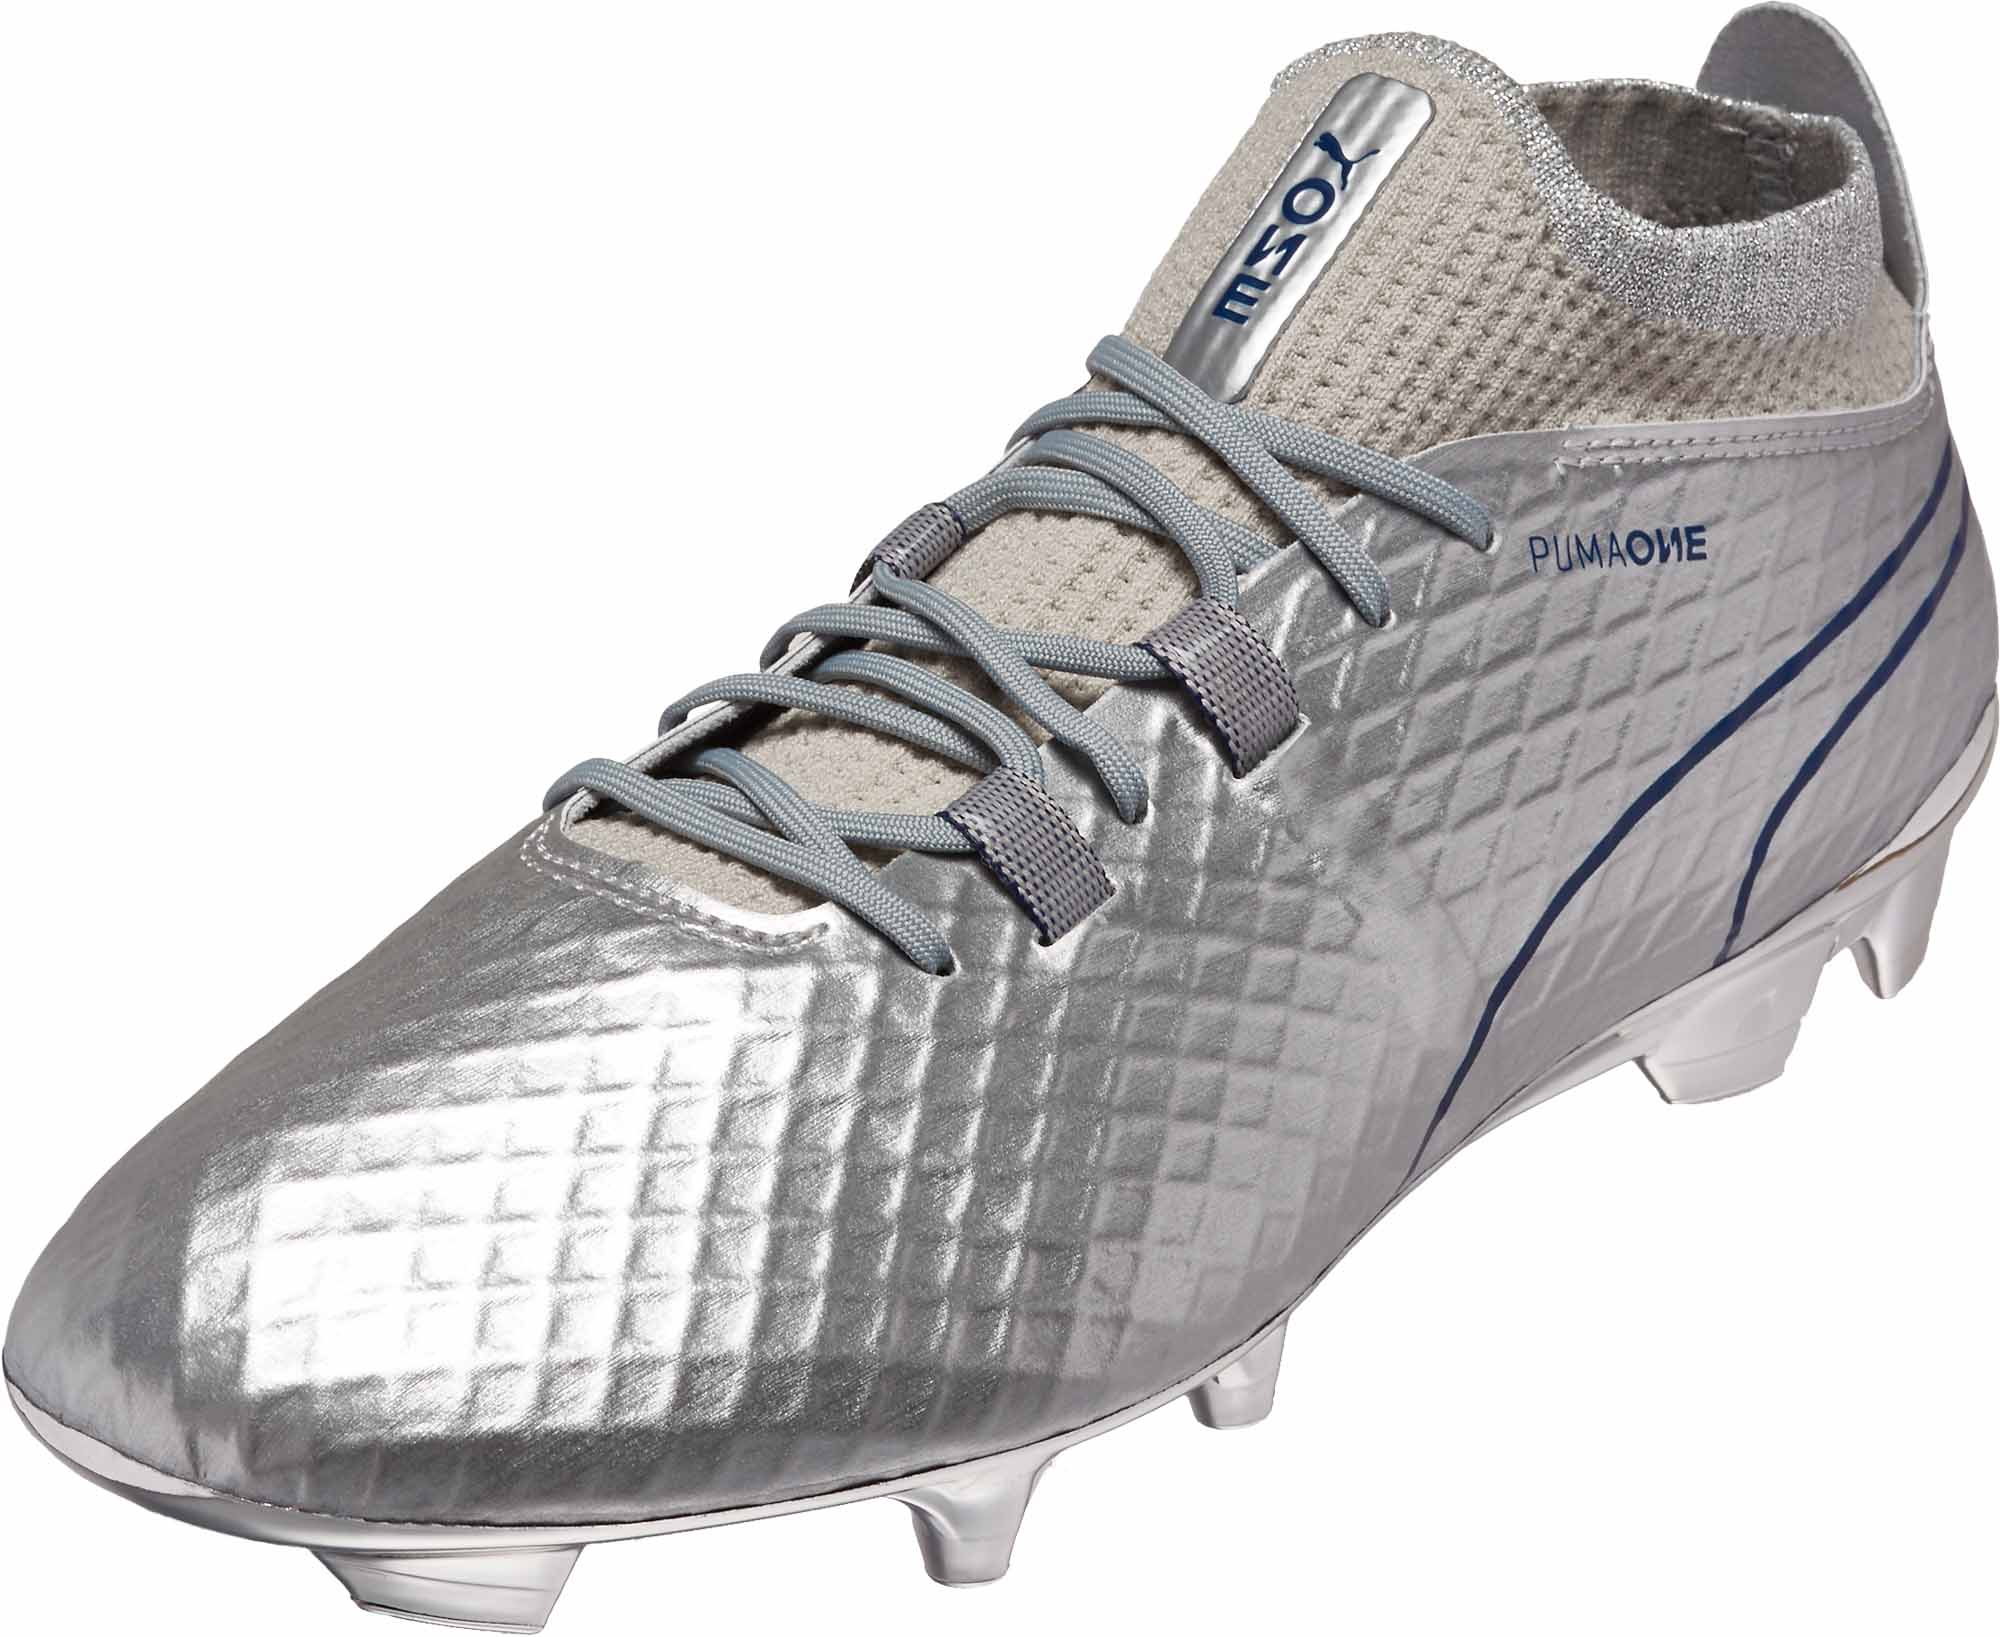 silver soccer cleats